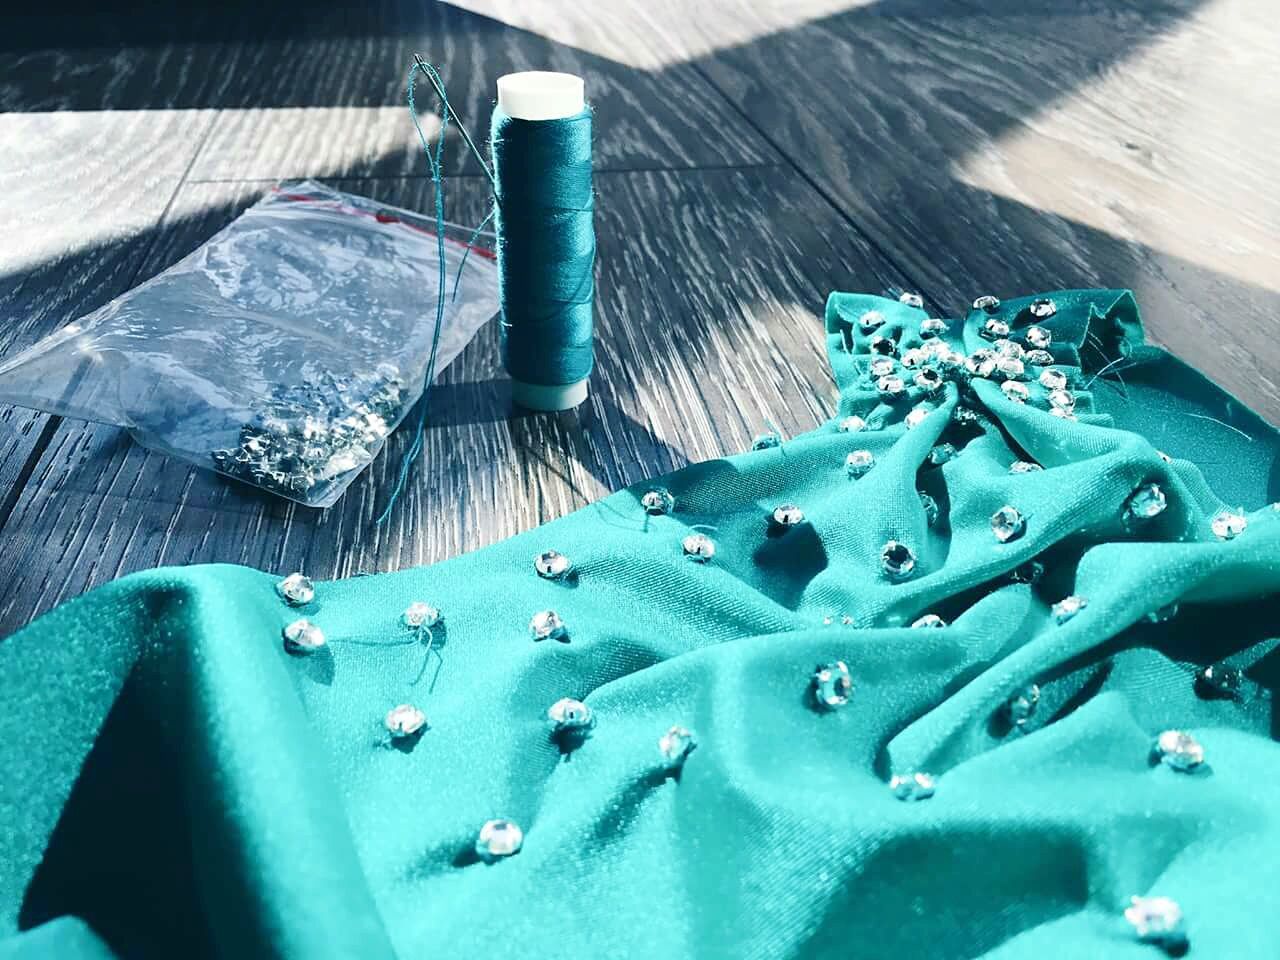 Diamonds on turquoise fabric by spool on wooden table